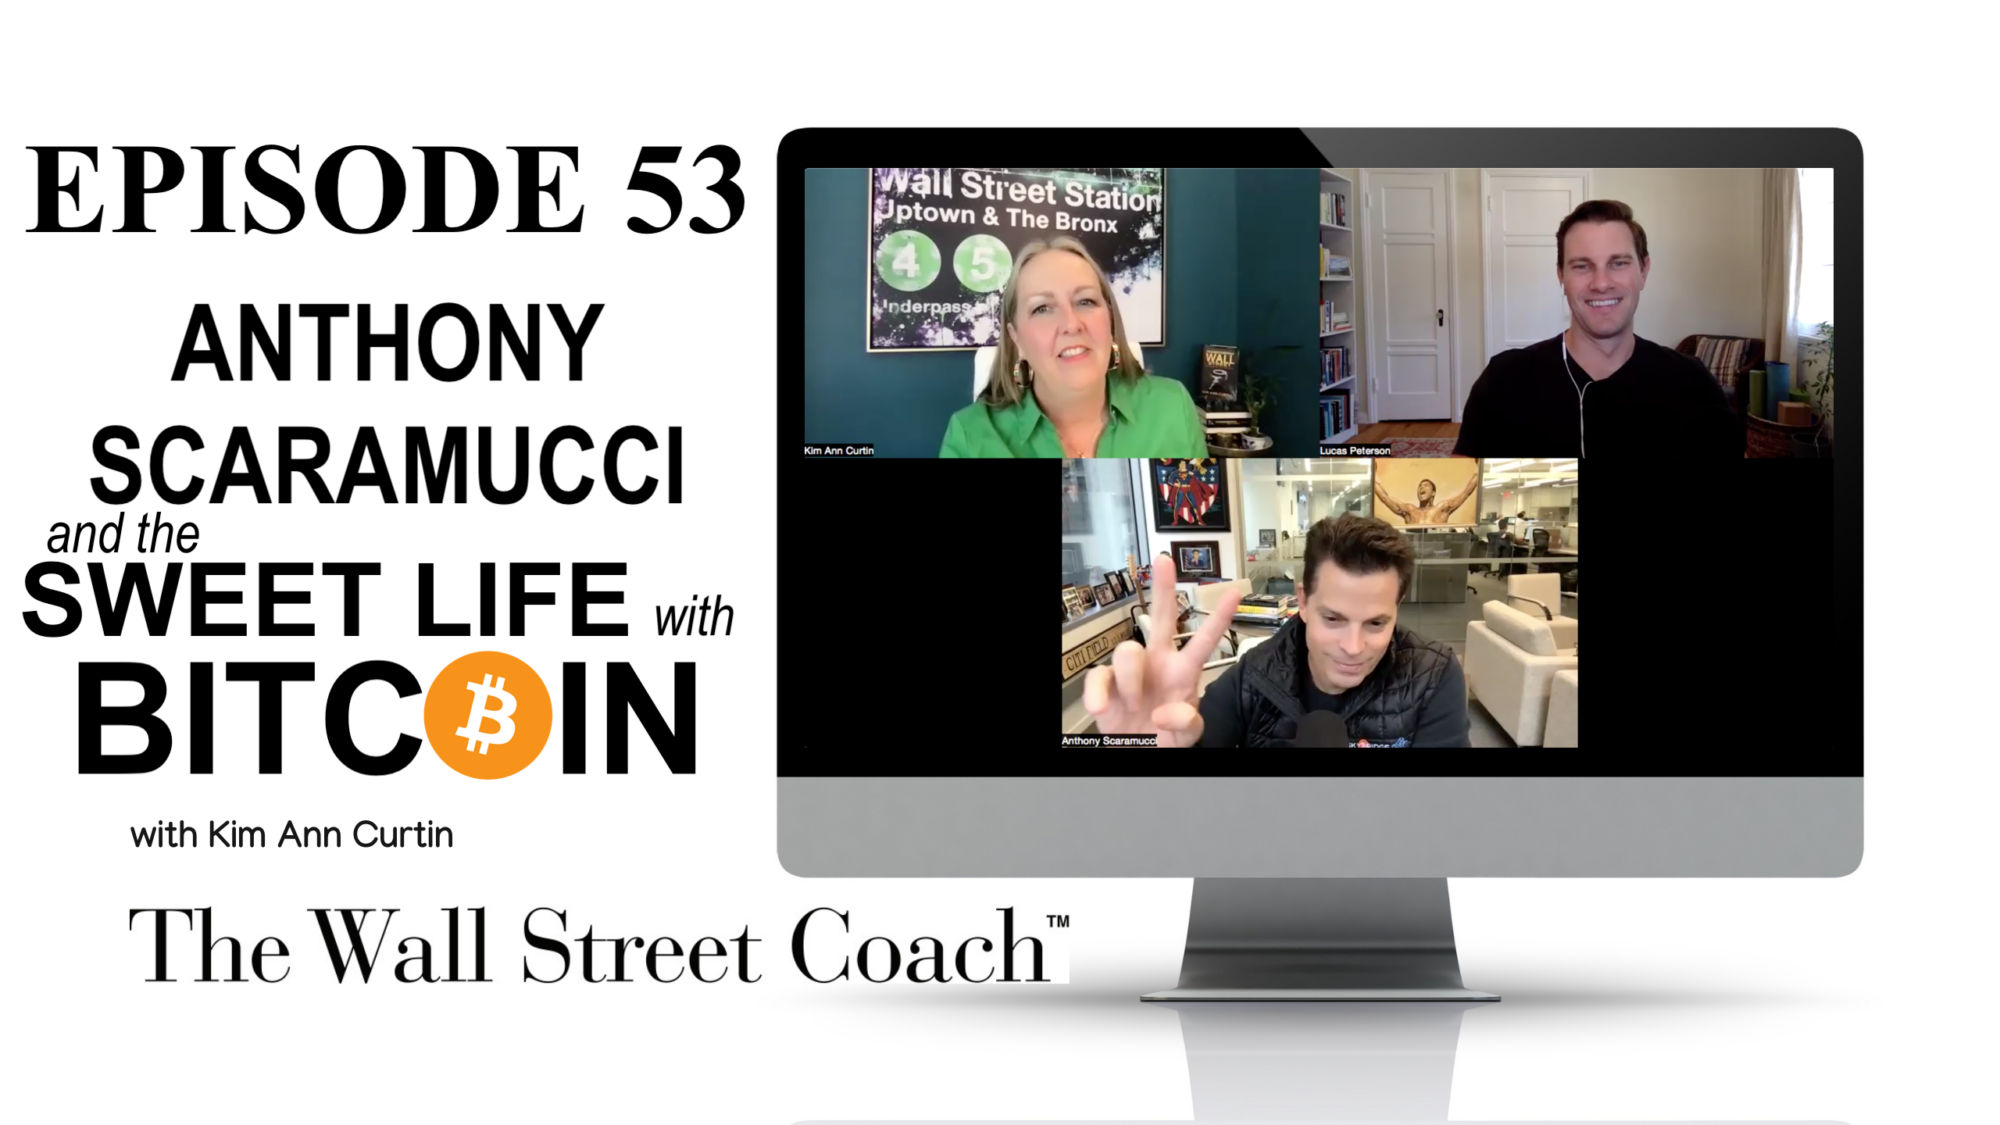 Episode 53: Anthony Scaramucci and The Sweet Life with Bitcoin